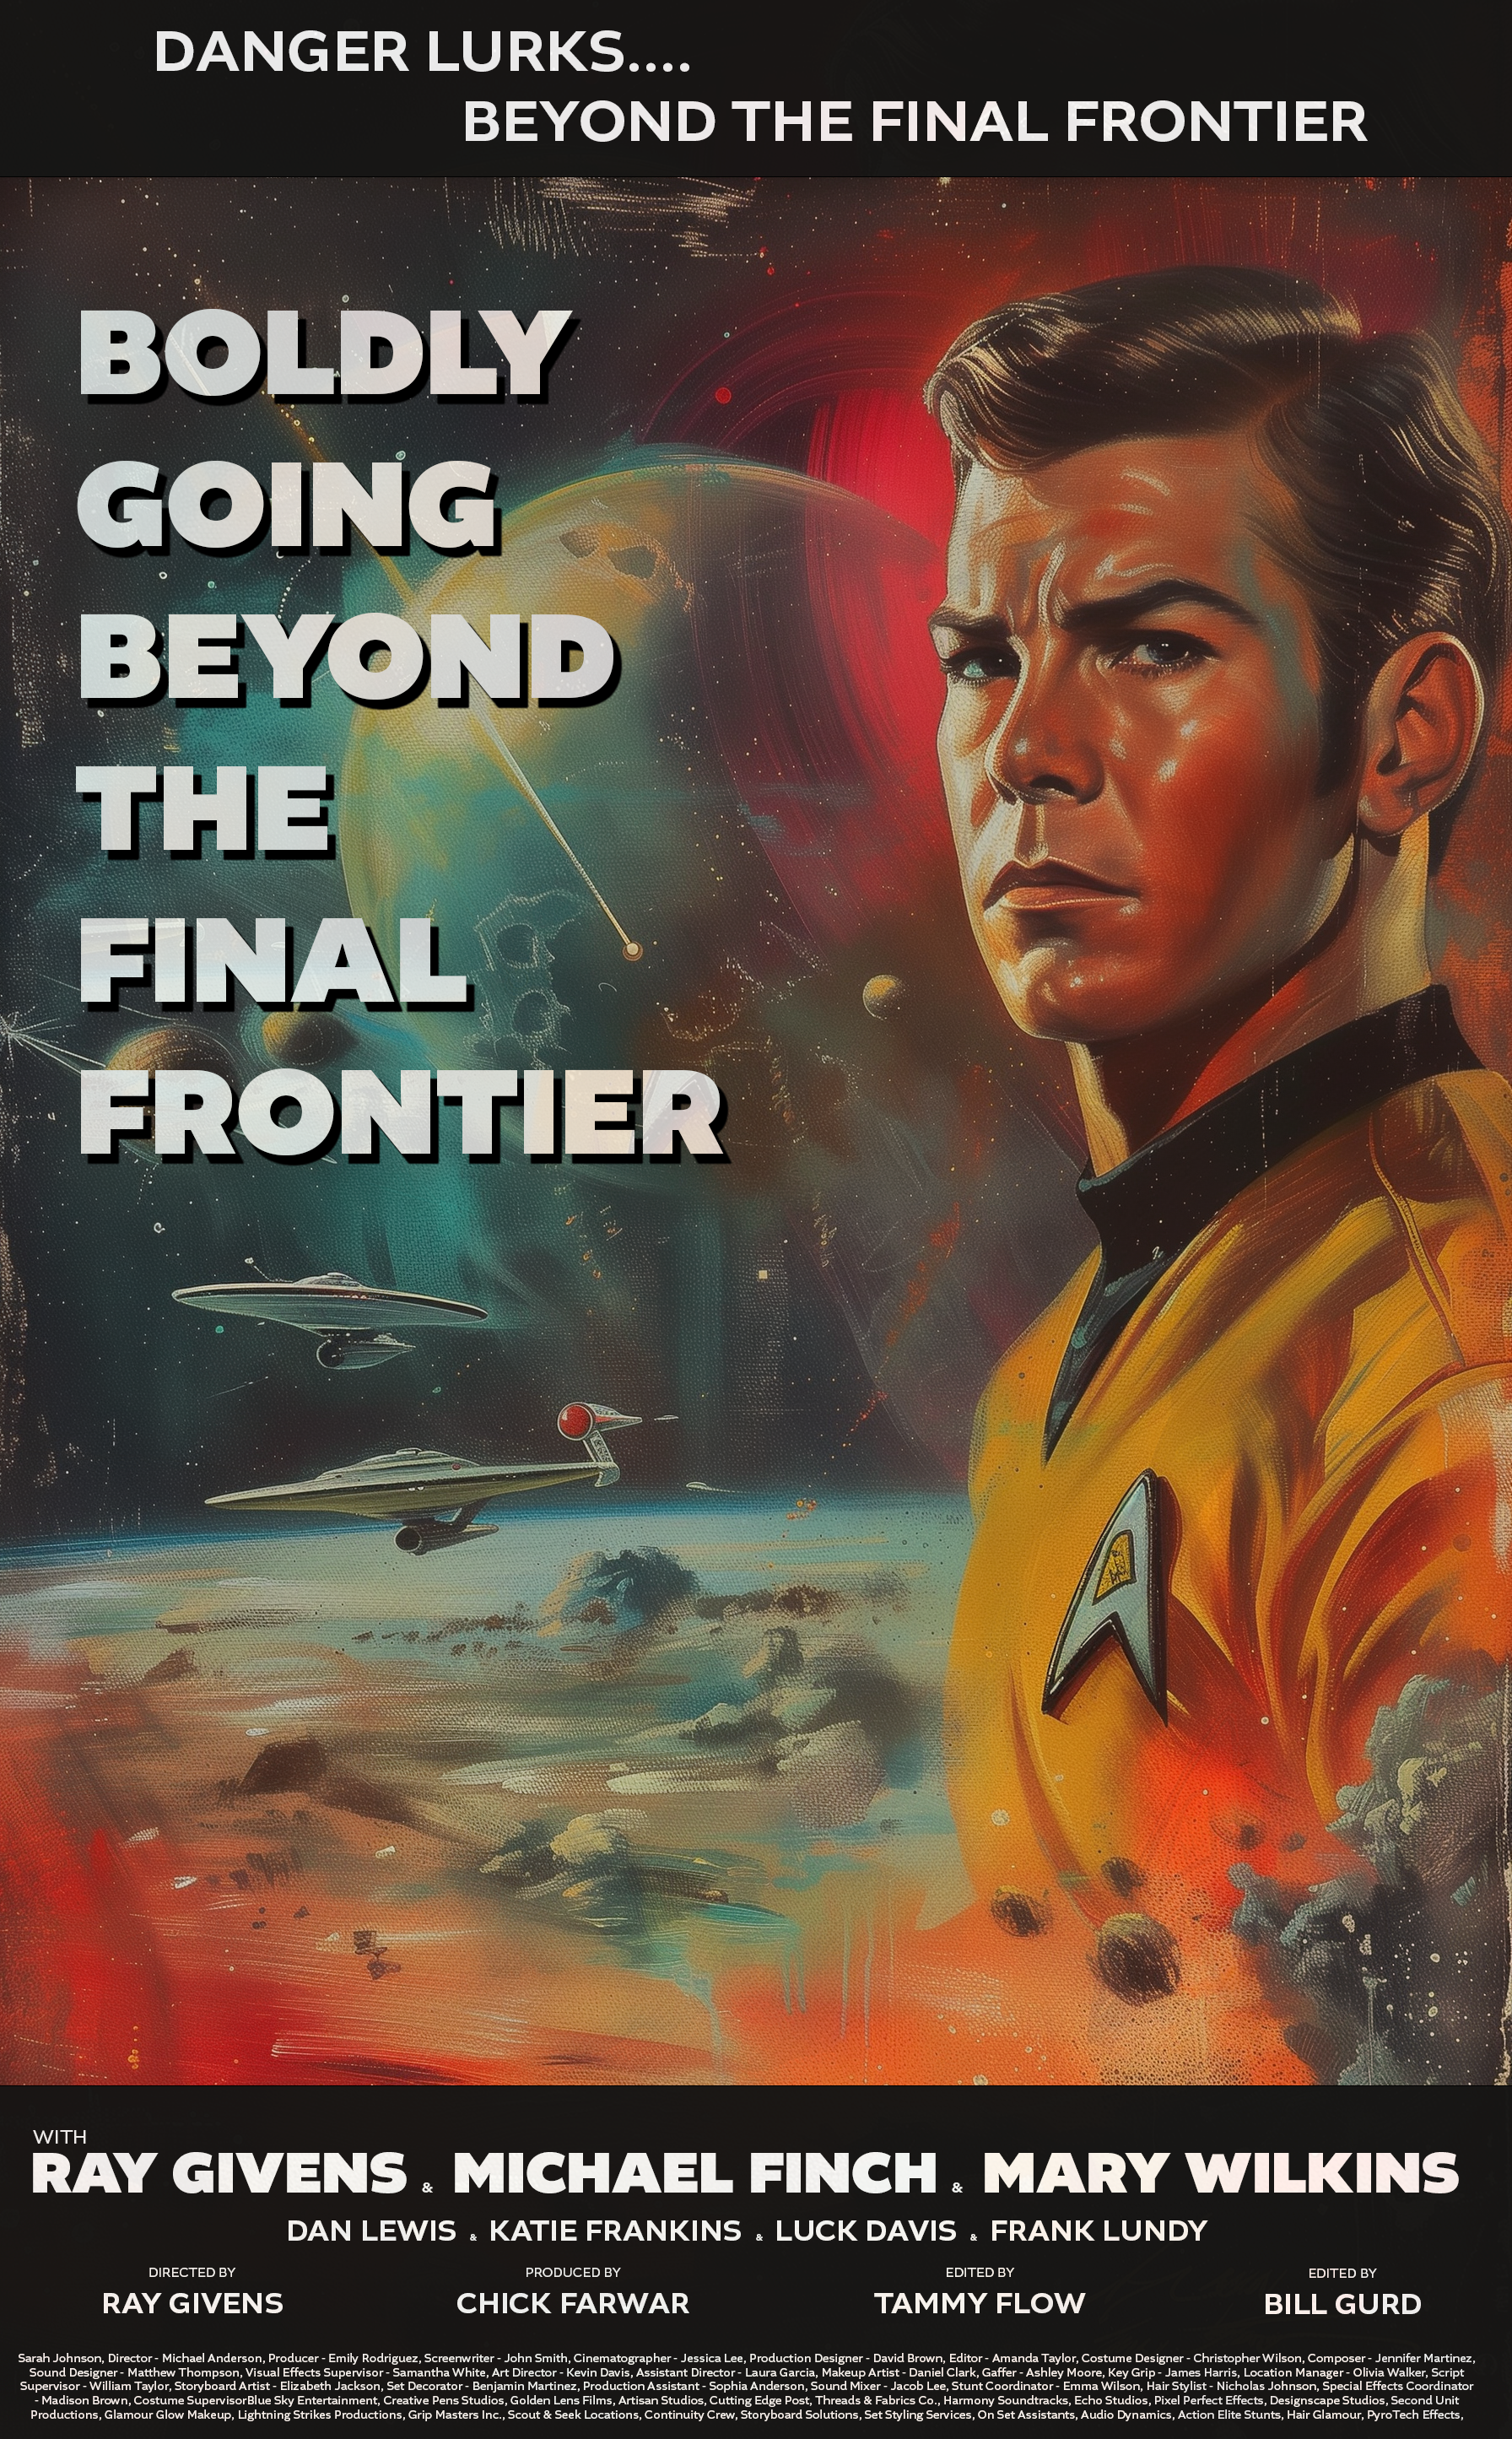 Name:  Beyond the Final Frontier.png
Views: 134
Size:  8.19 MB